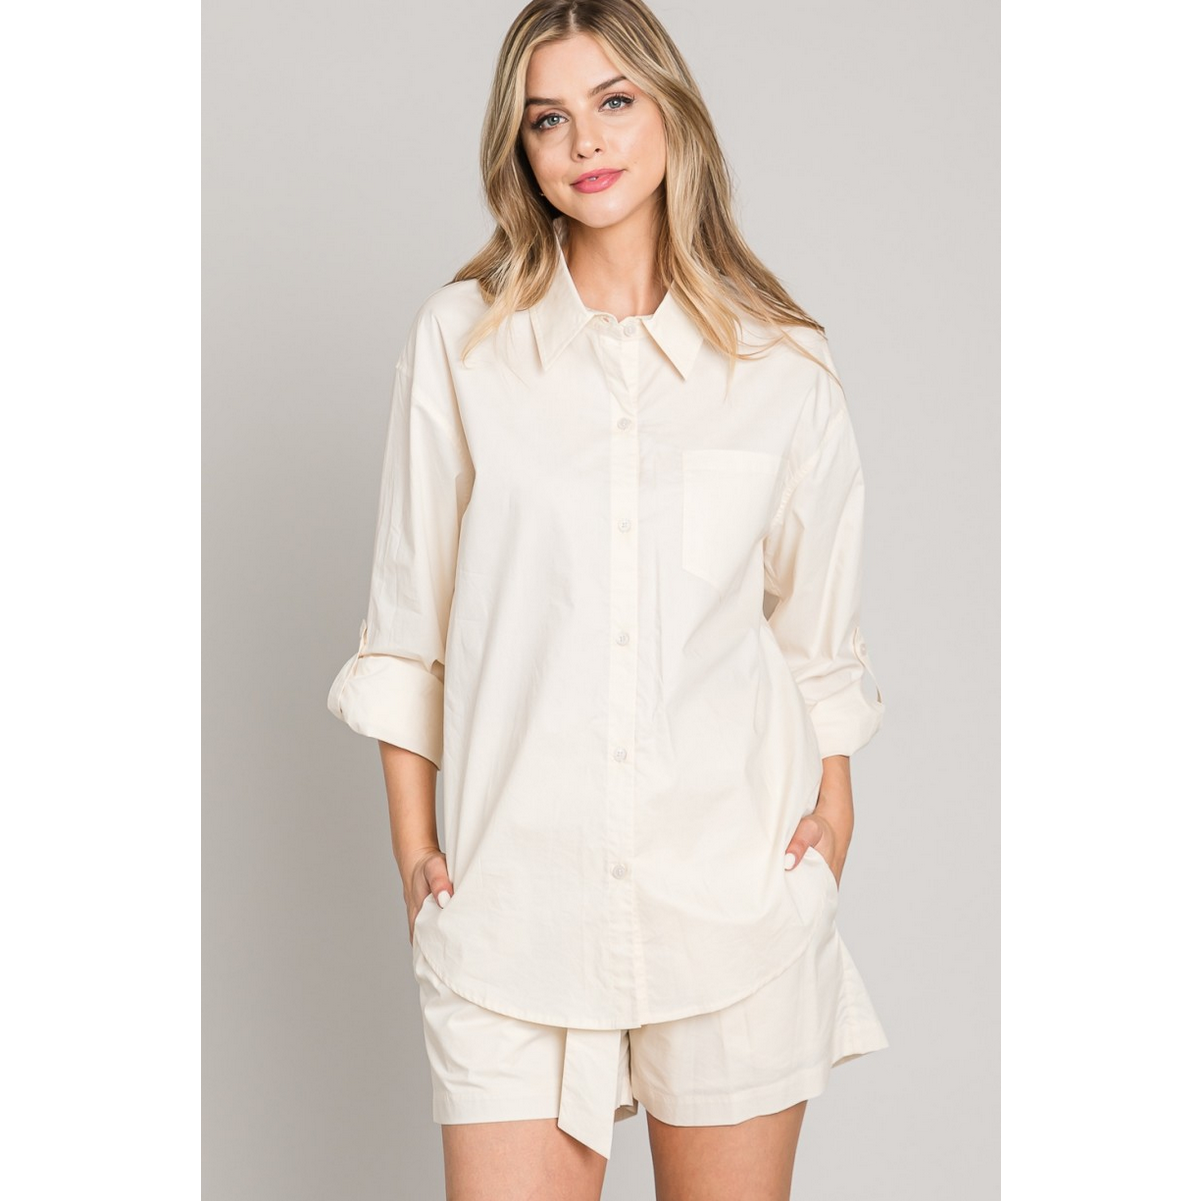 Suzann Light Poplin Shirt in Sand-W Top-Graceful & Chic Boutique, Family Clothing Store in Waxahachie, Texas